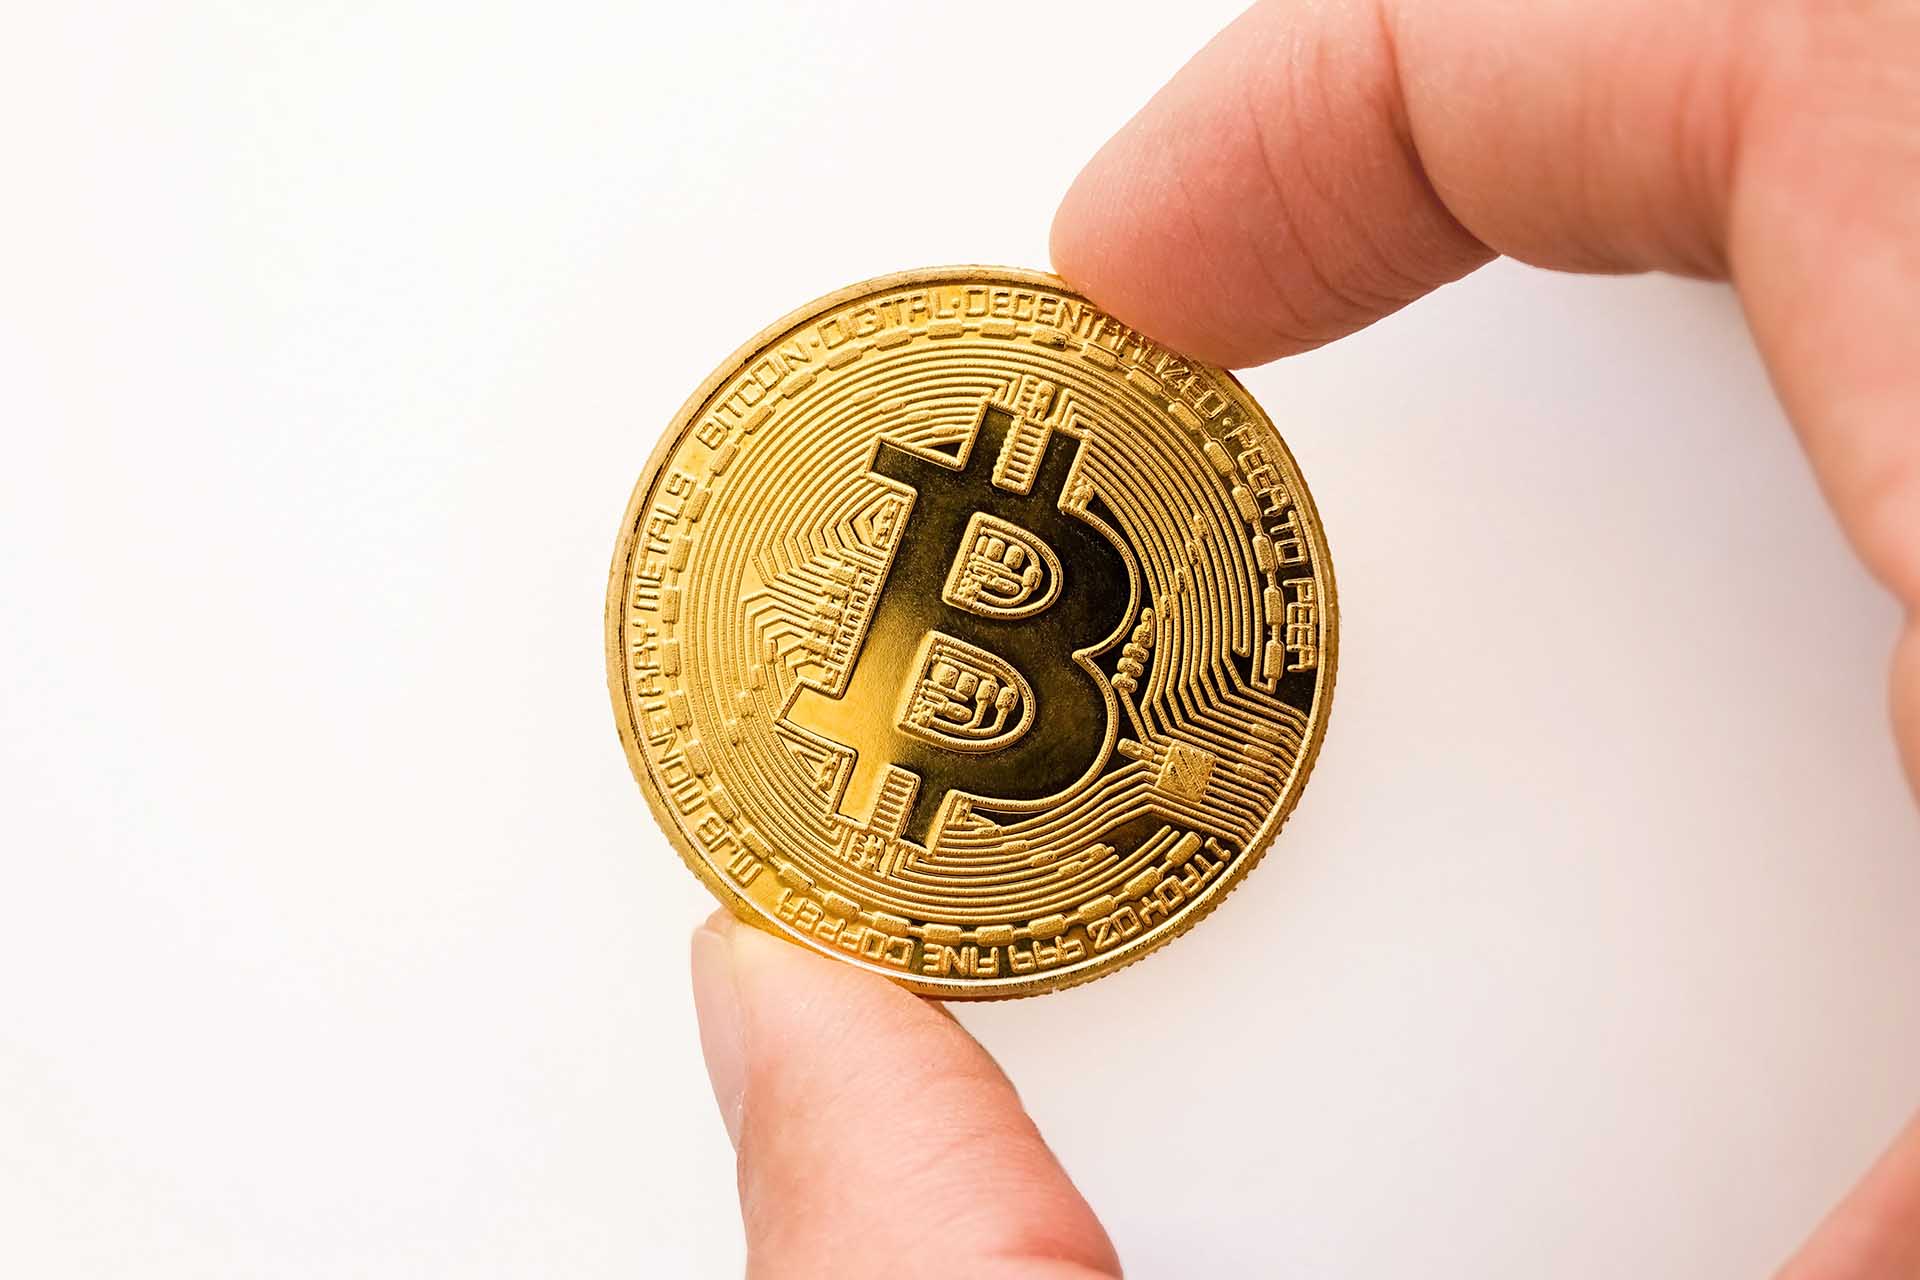 hand holding a physical bitcoin made of gold